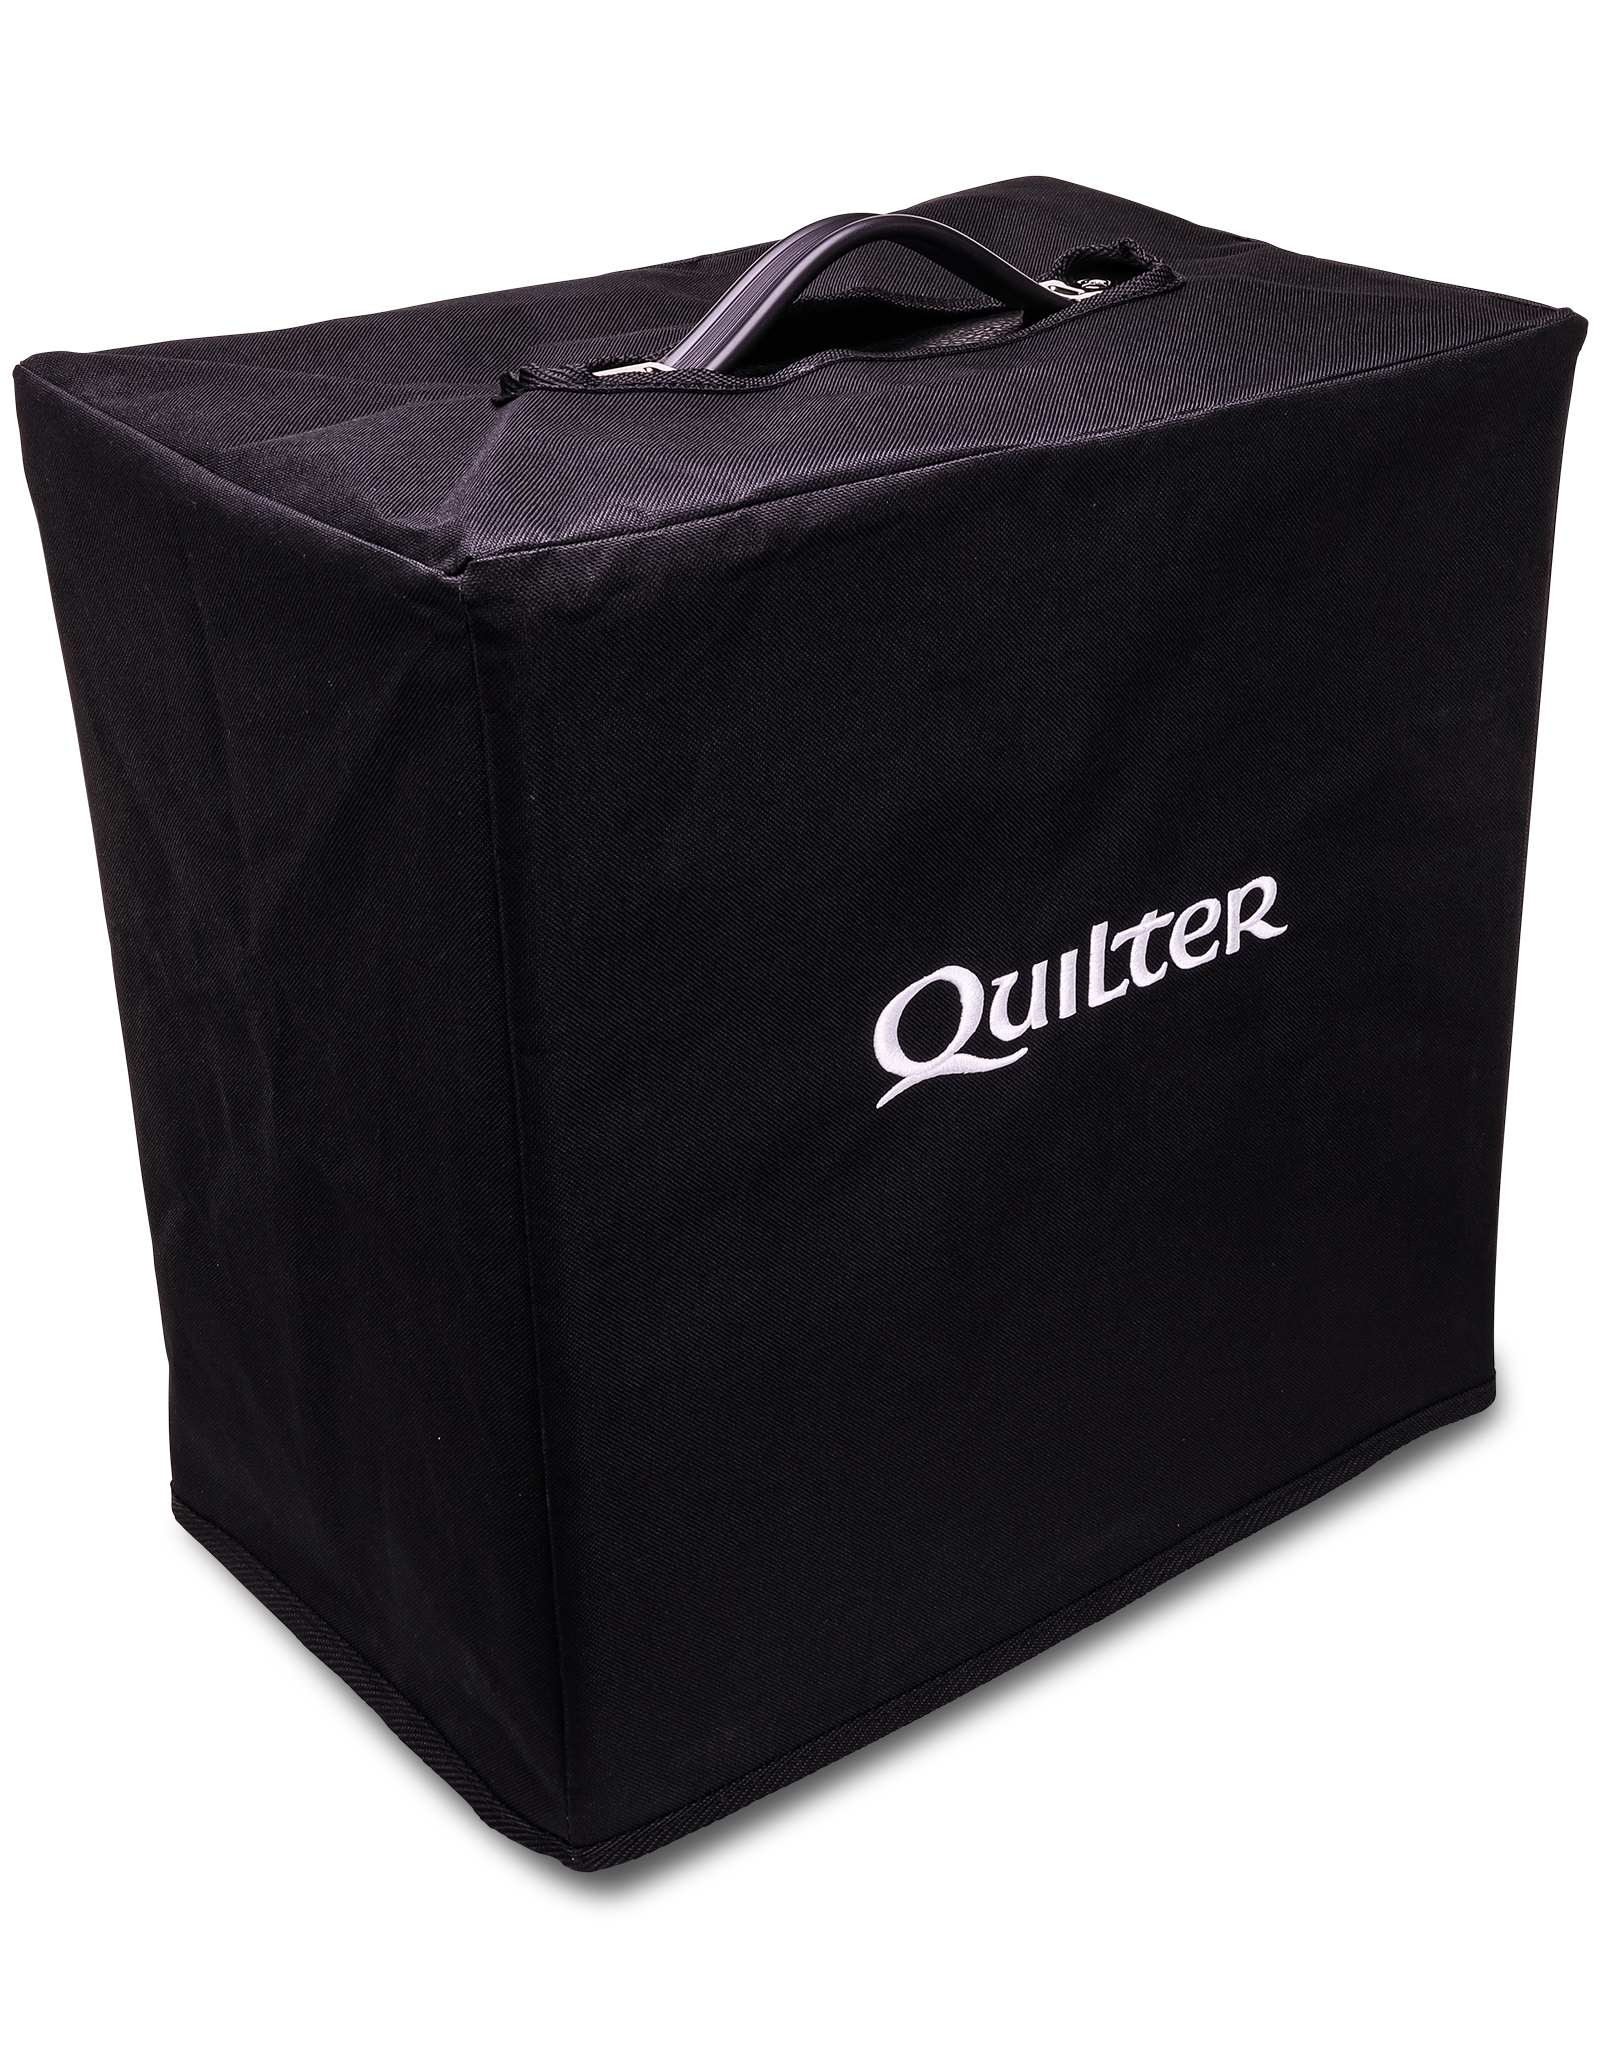 Quilter Quilter Aviator Cub Tweed, Blonde, and Blackface 1x12 Combo Amp